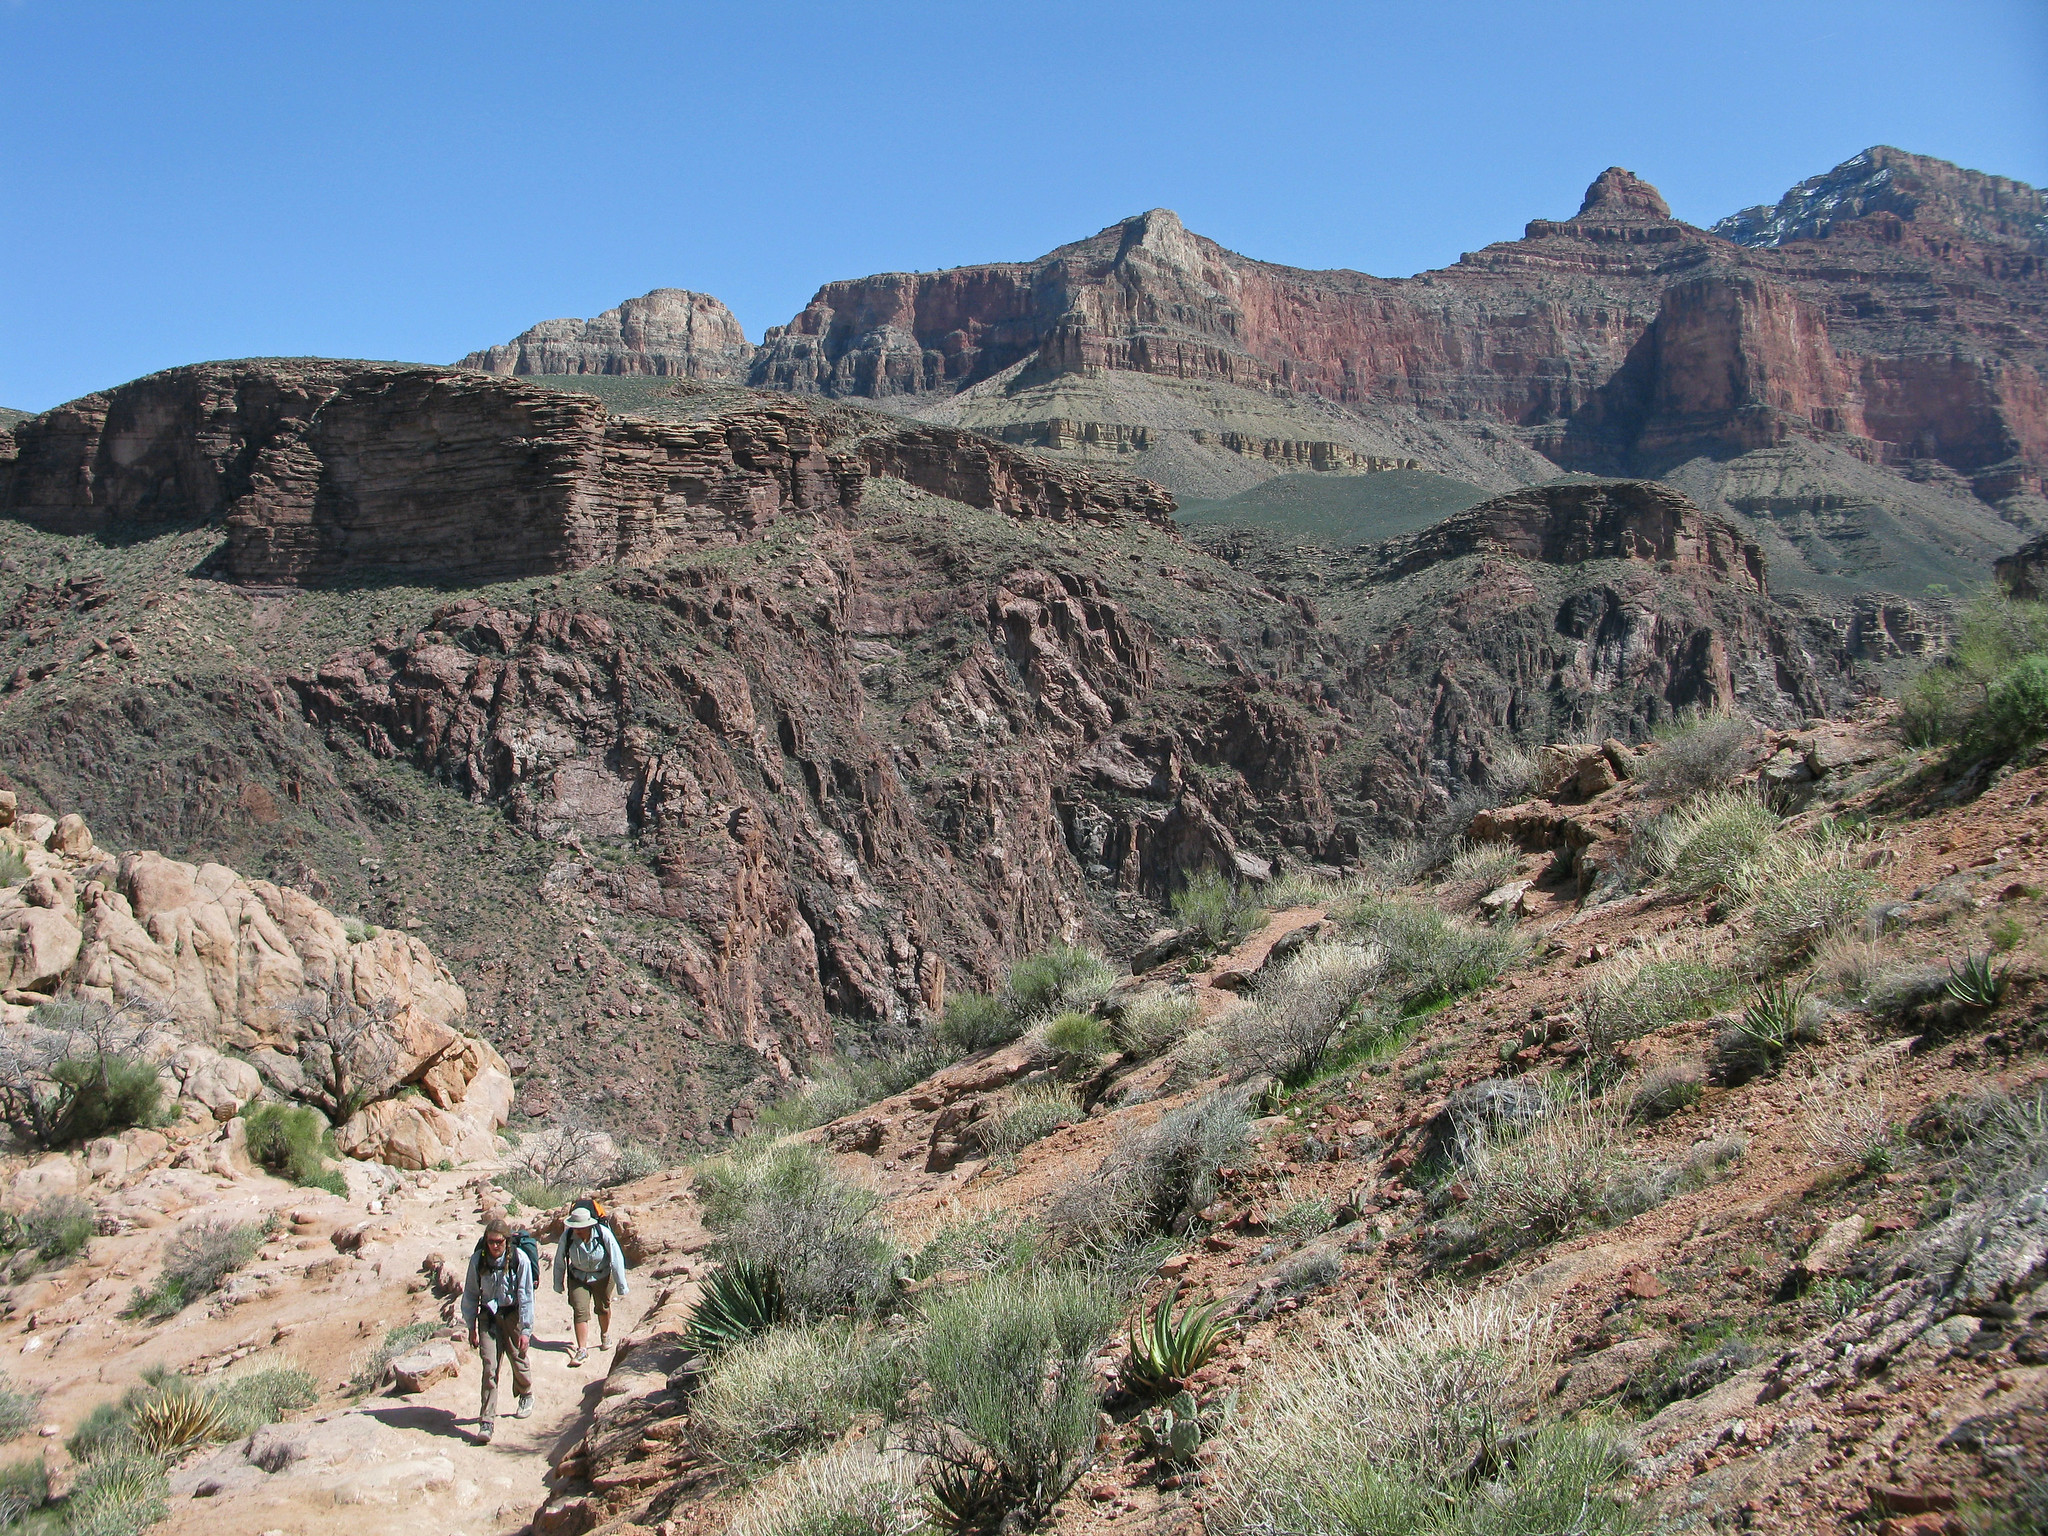 Two hikers with backpacks hike up the Bright Angel Trail with steep canyon walls in the background.